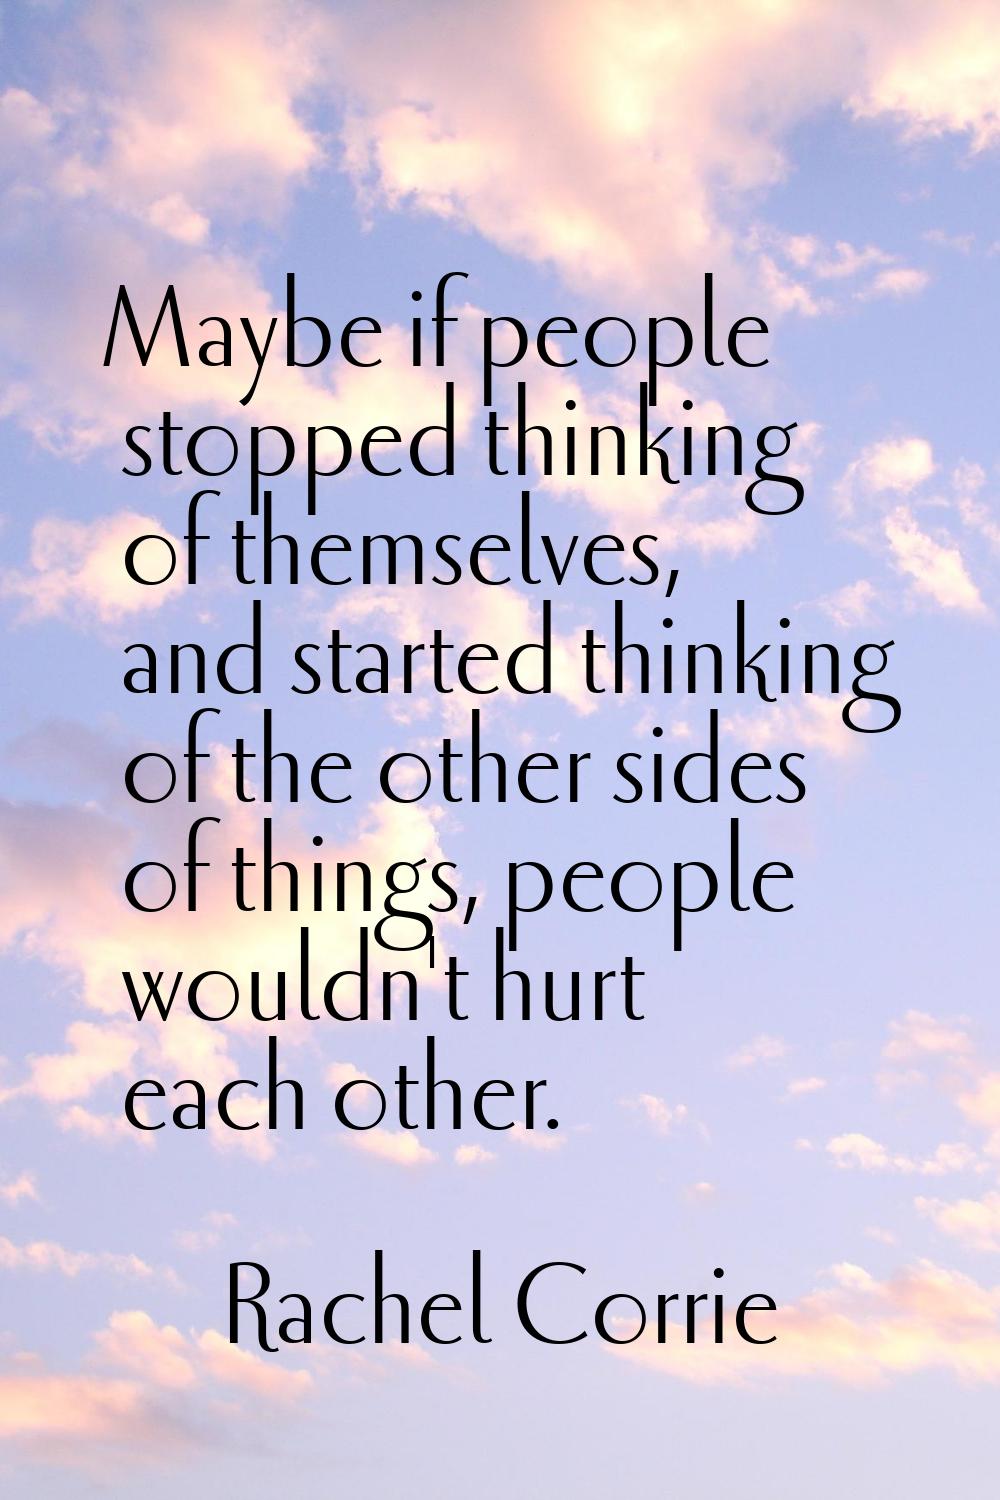 Maybe if people stopped thinking of themselves, and started thinking of the other sides of things, 